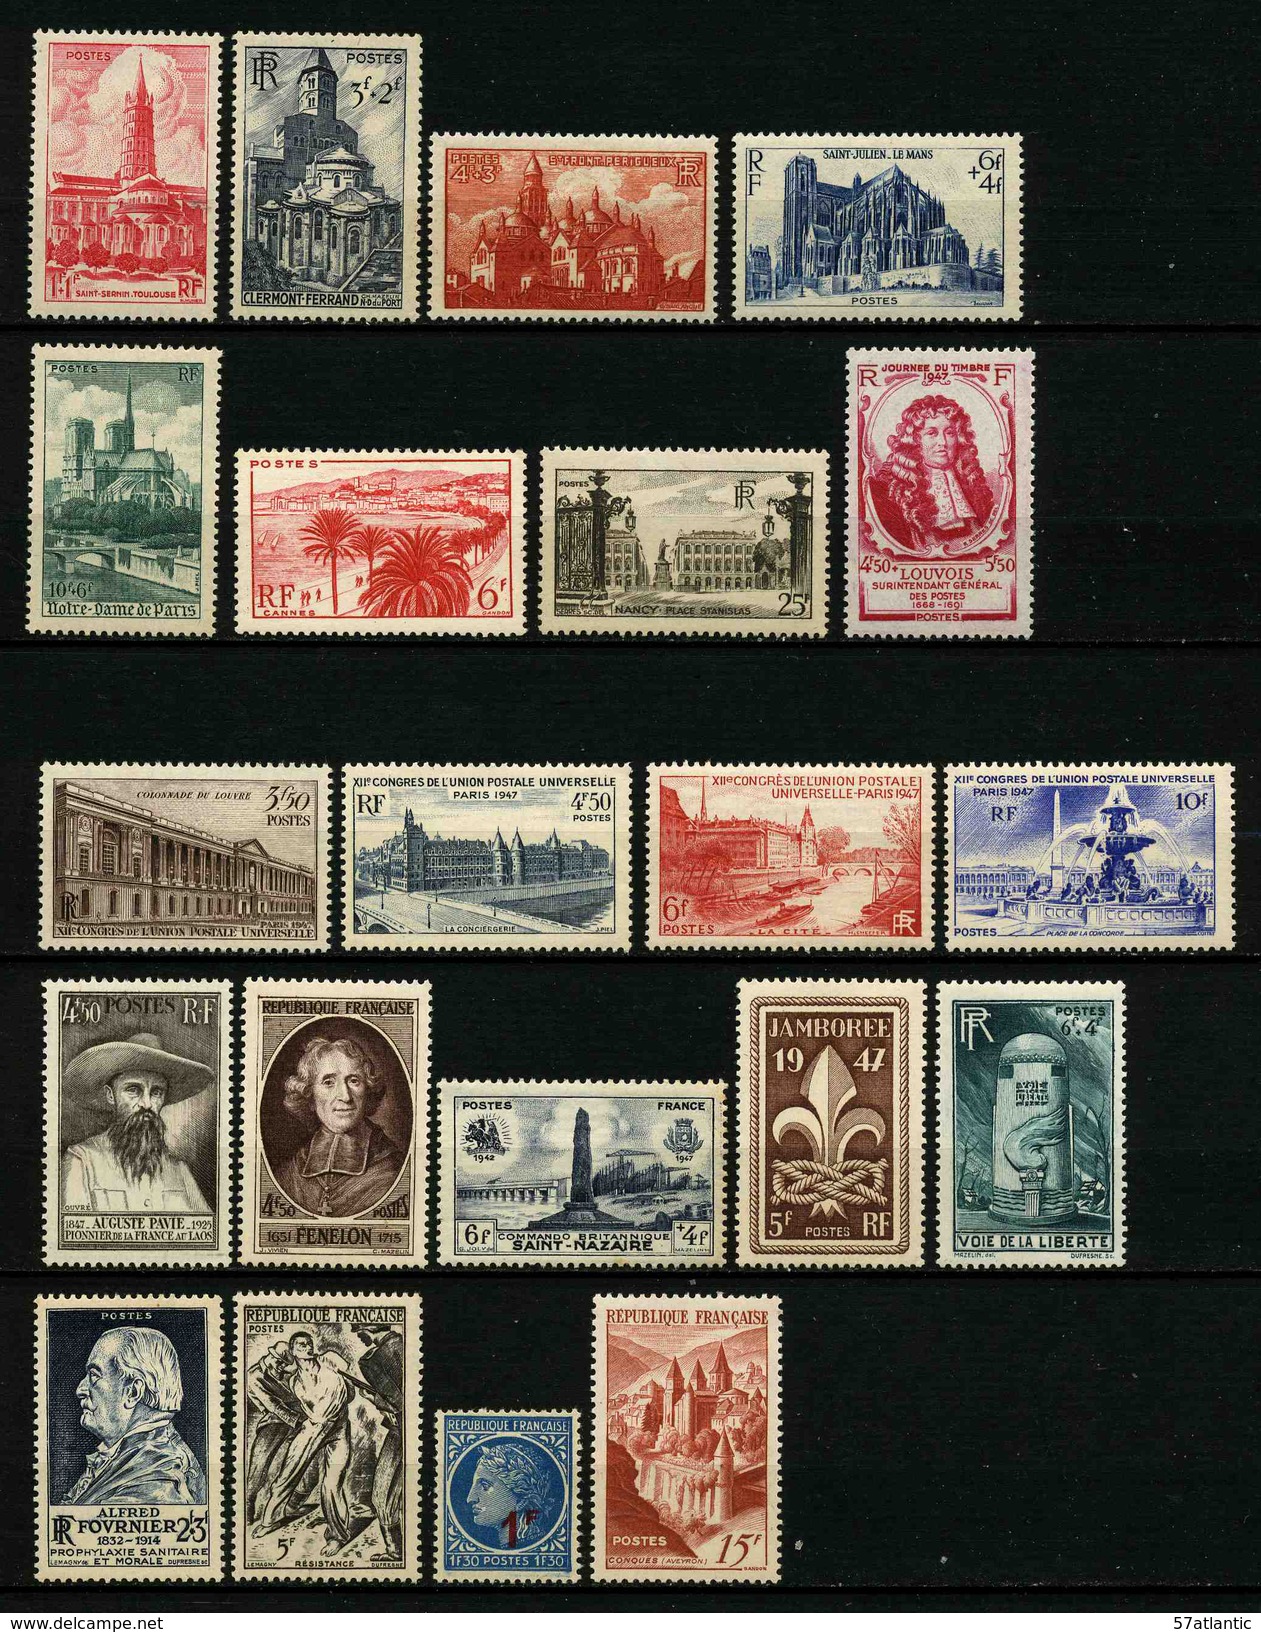 FRANCE - ANNEE COMPLETE 1947 - YT 772 à 792 ** - 21 TIMBRES NEUFS ** - 1940-1949